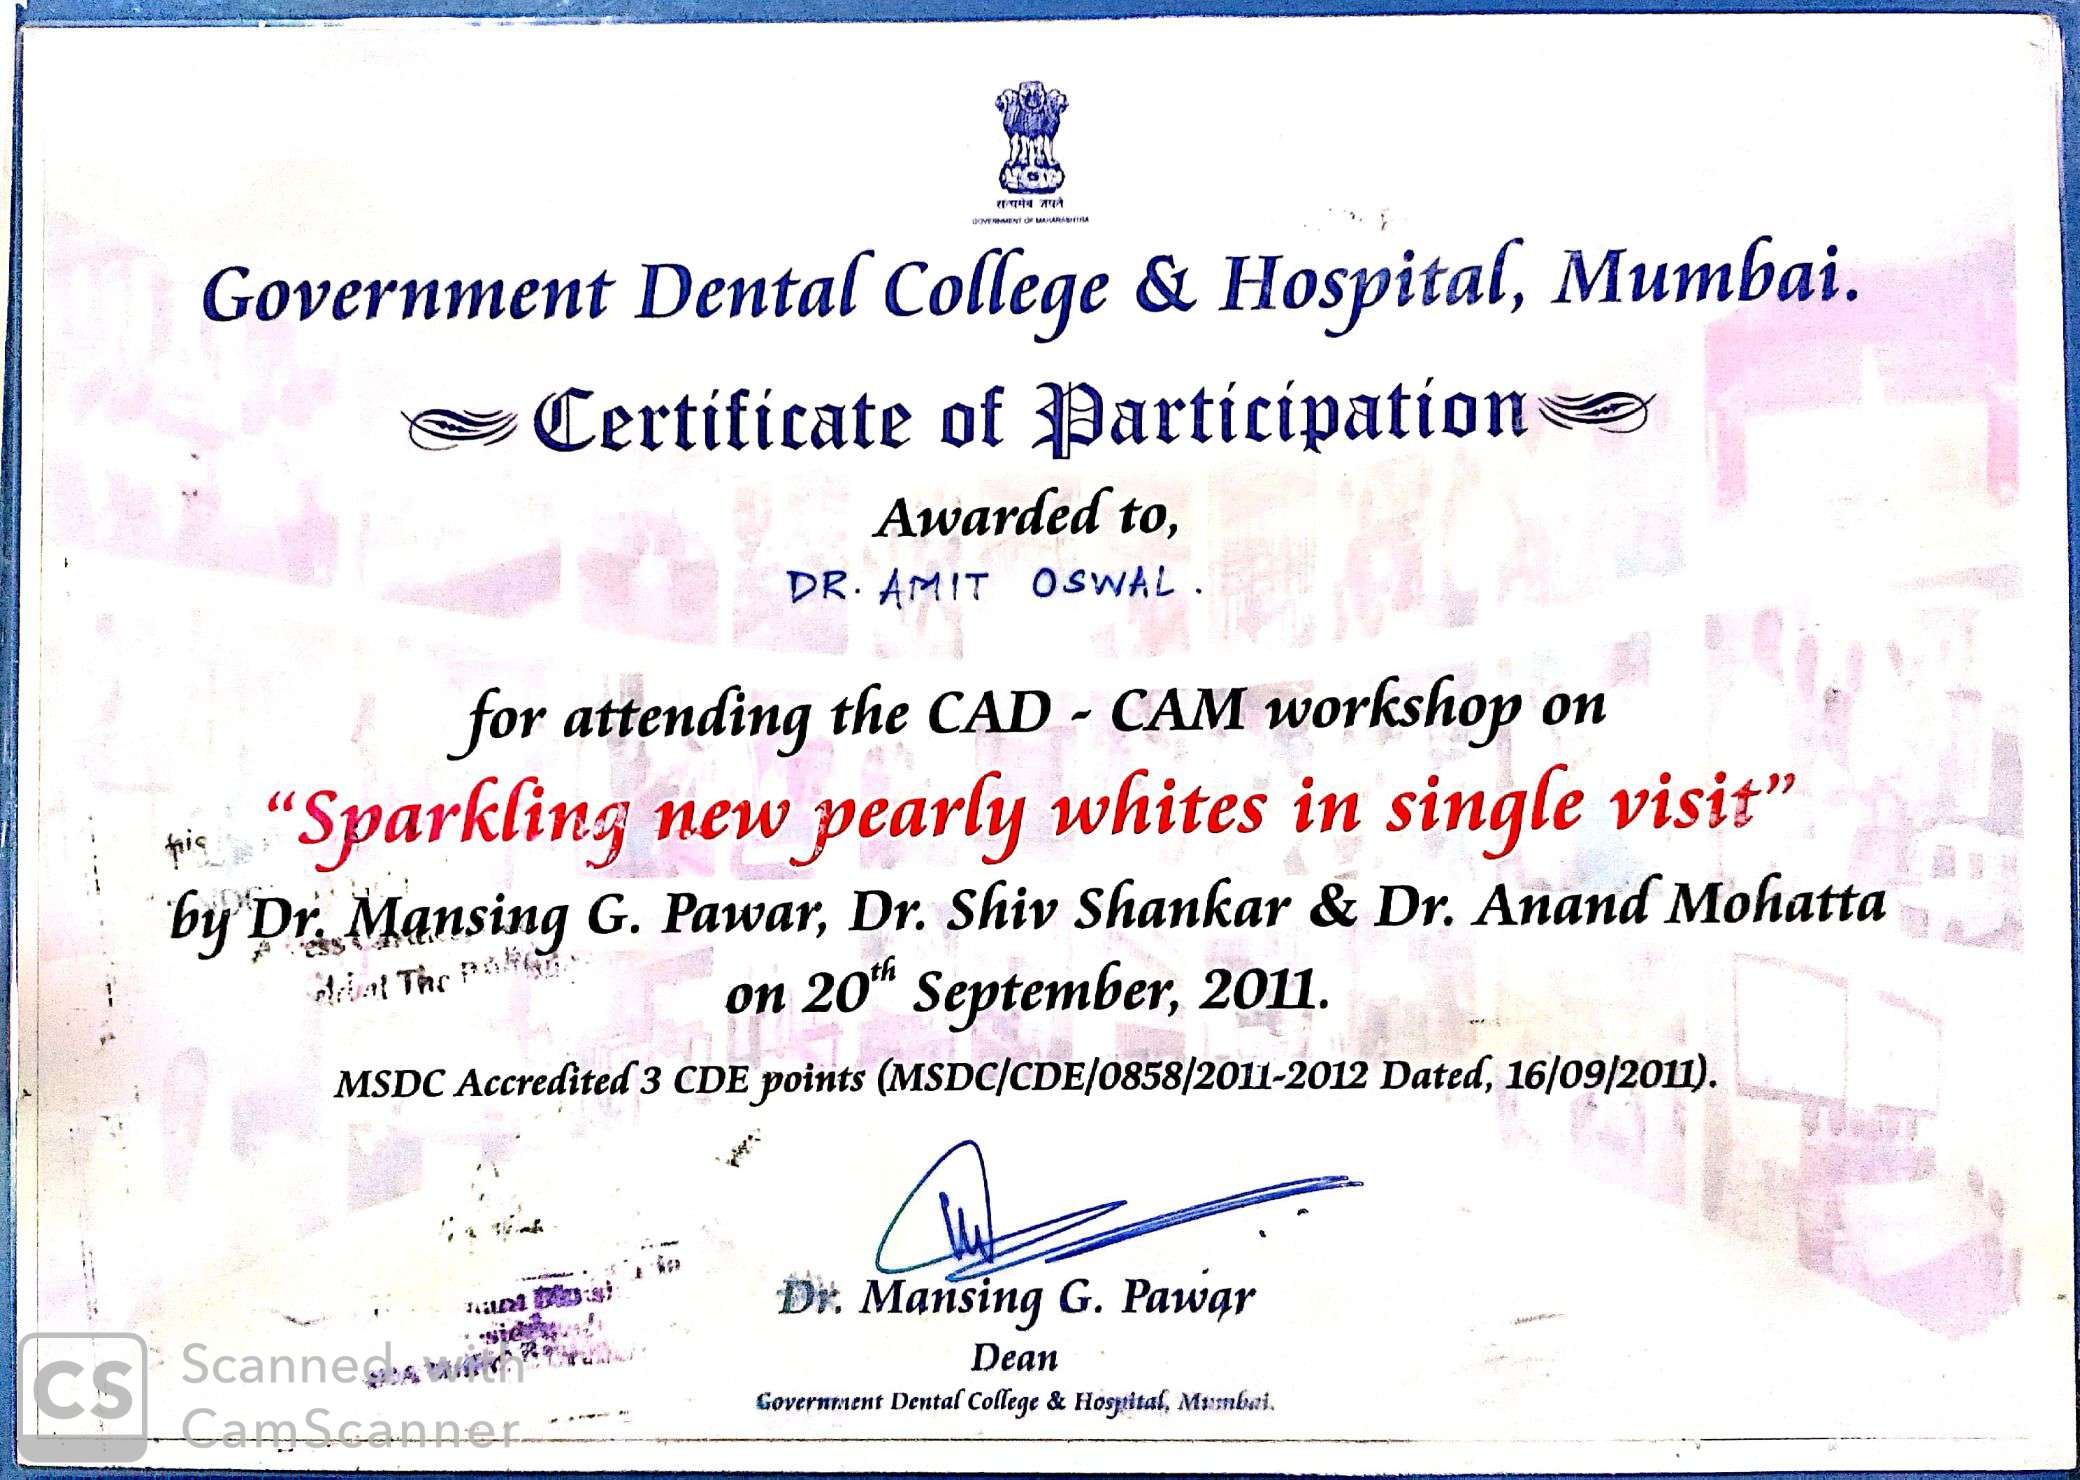 Participation at CAD - CAM workshop by the best cosmetic dentist in mumbai